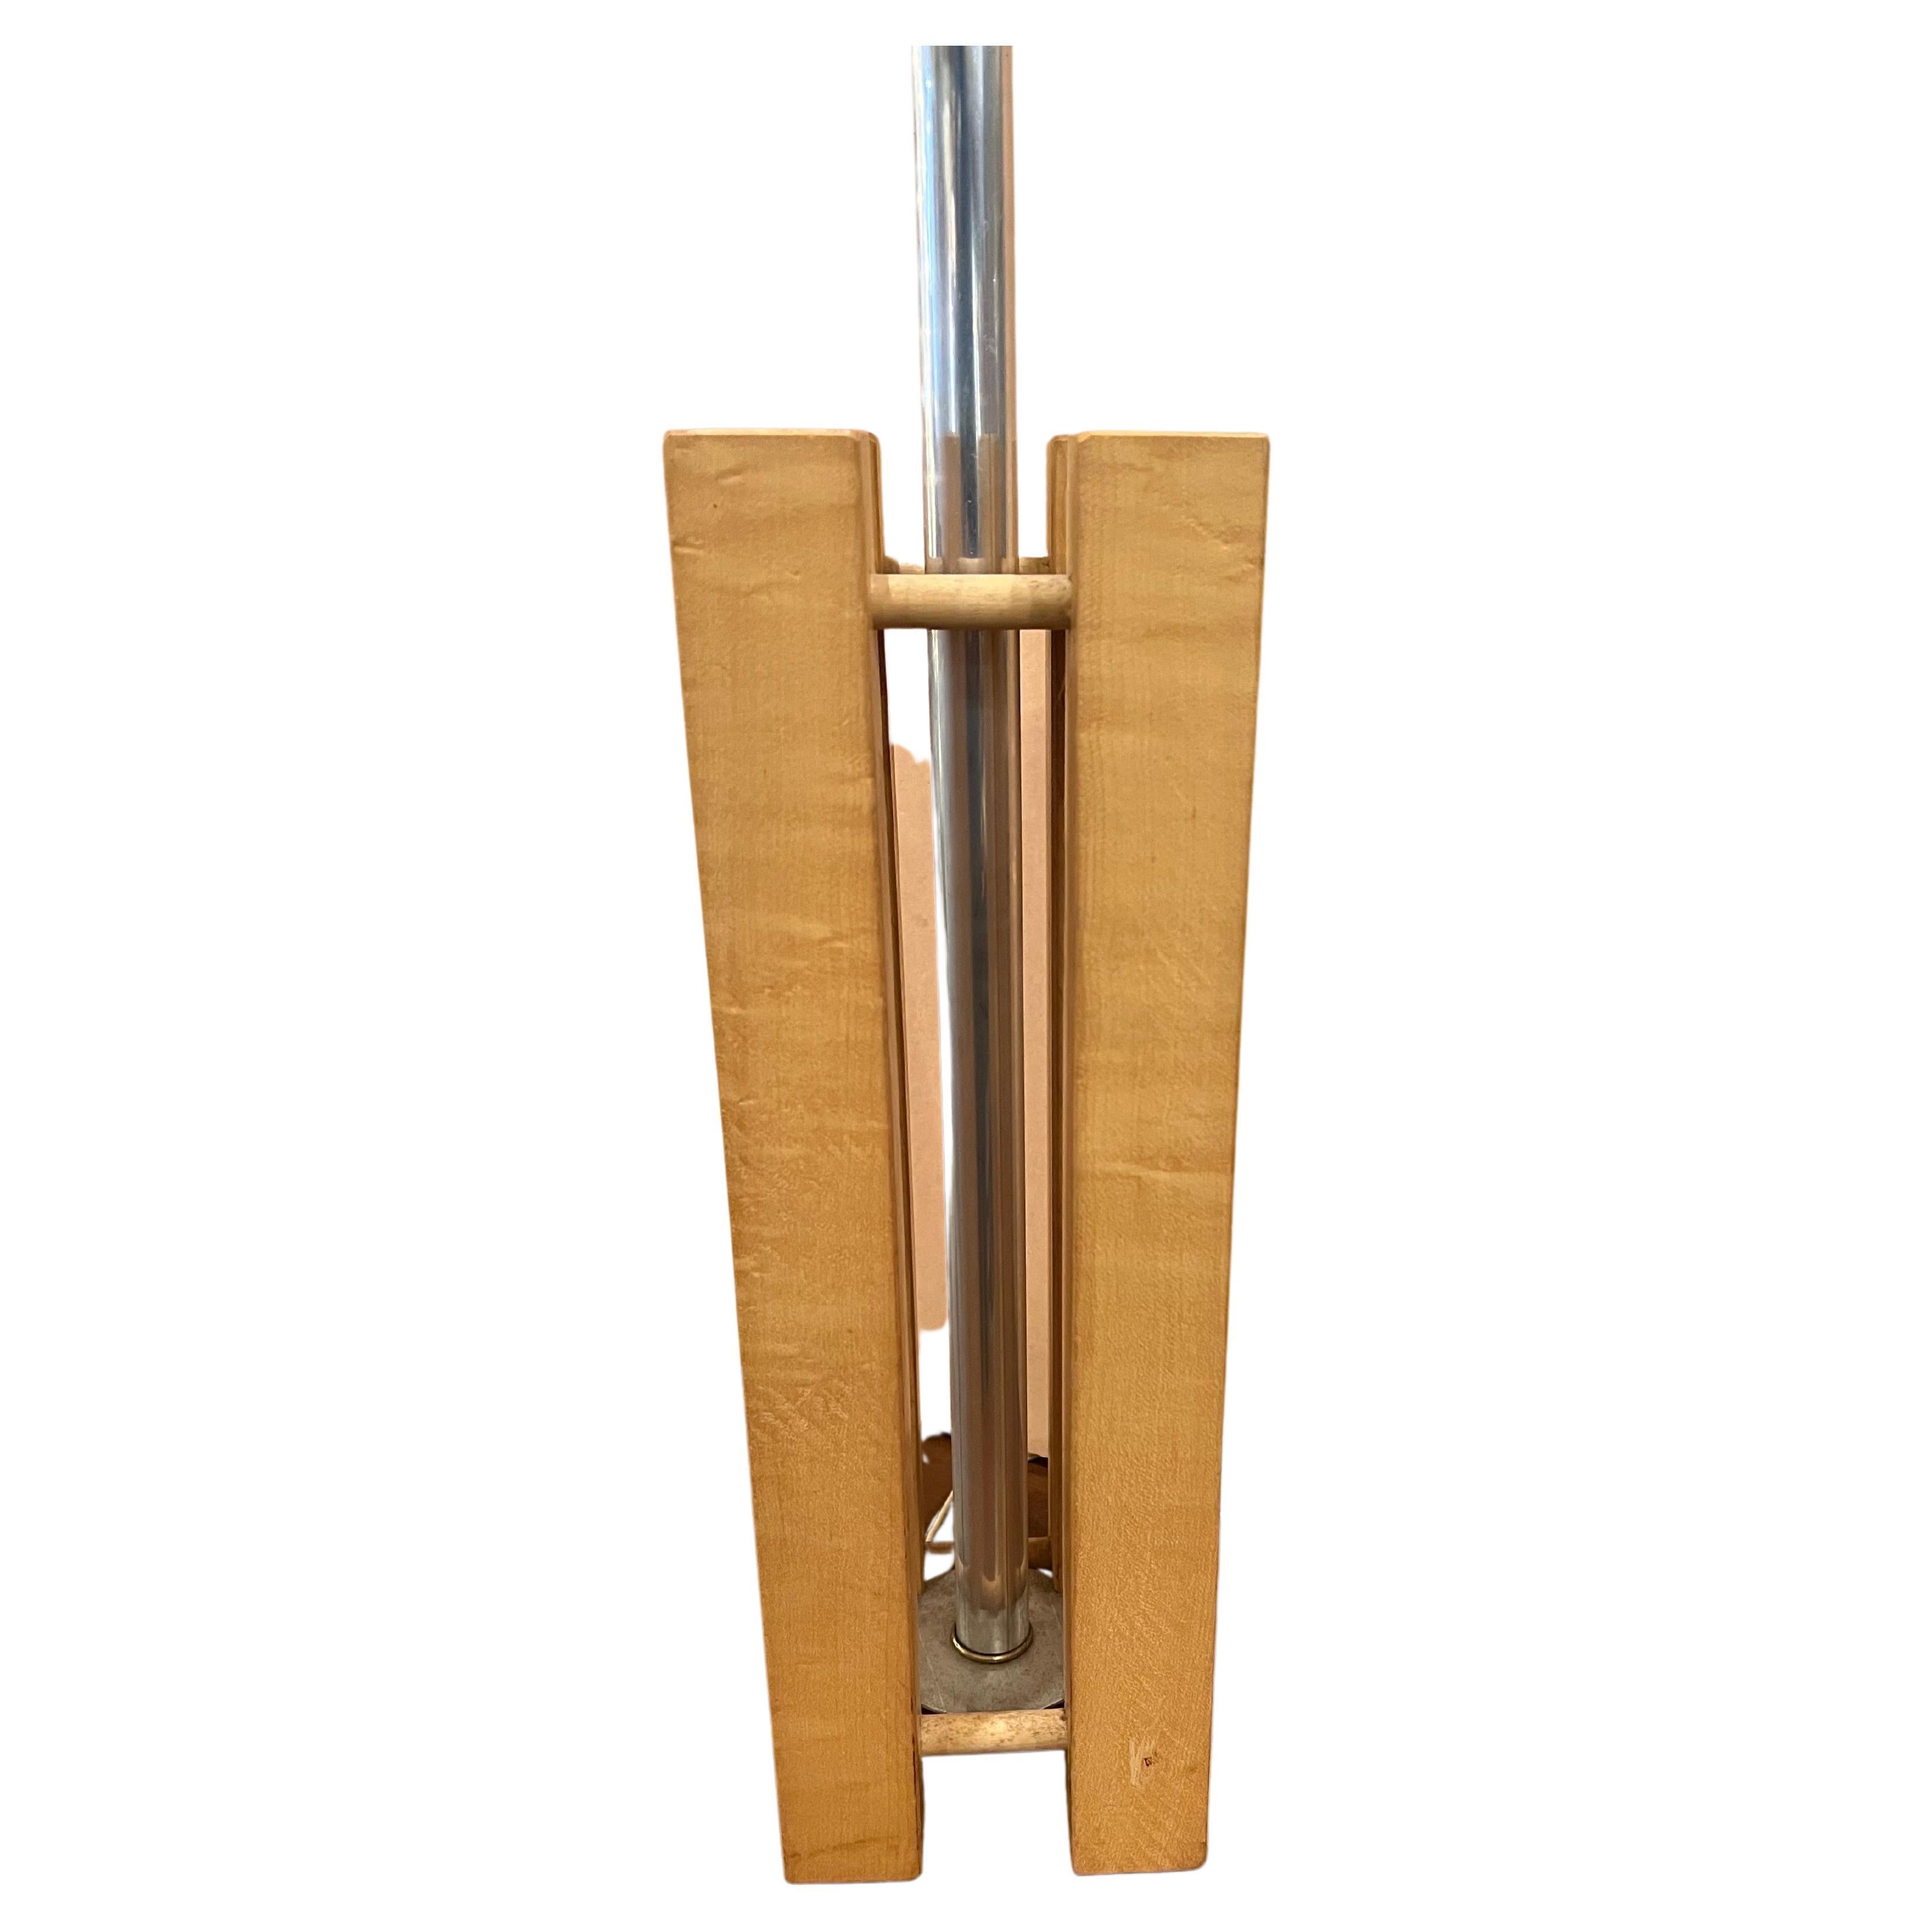 Postmodern Solid Birch Wood & Aluminum Sculptural Table/ Desk Lamp In Good Condition For Sale In San Diego, CA